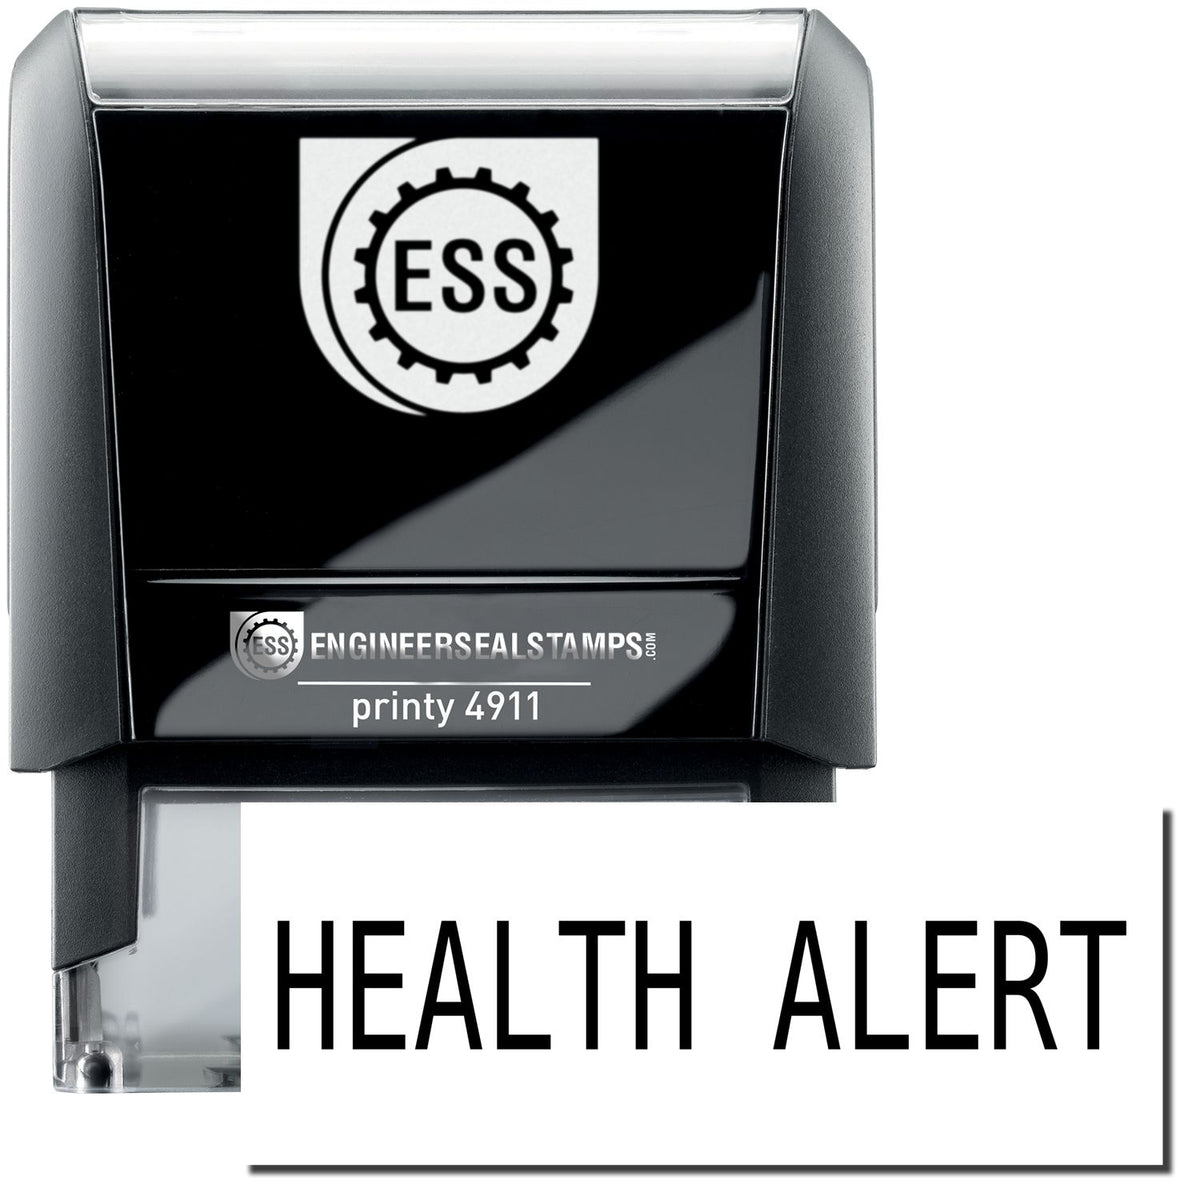 A self-inking stamp with a stamped image showing how the text &quot;HEALTH ALERT&quot; is displayed after stamping.